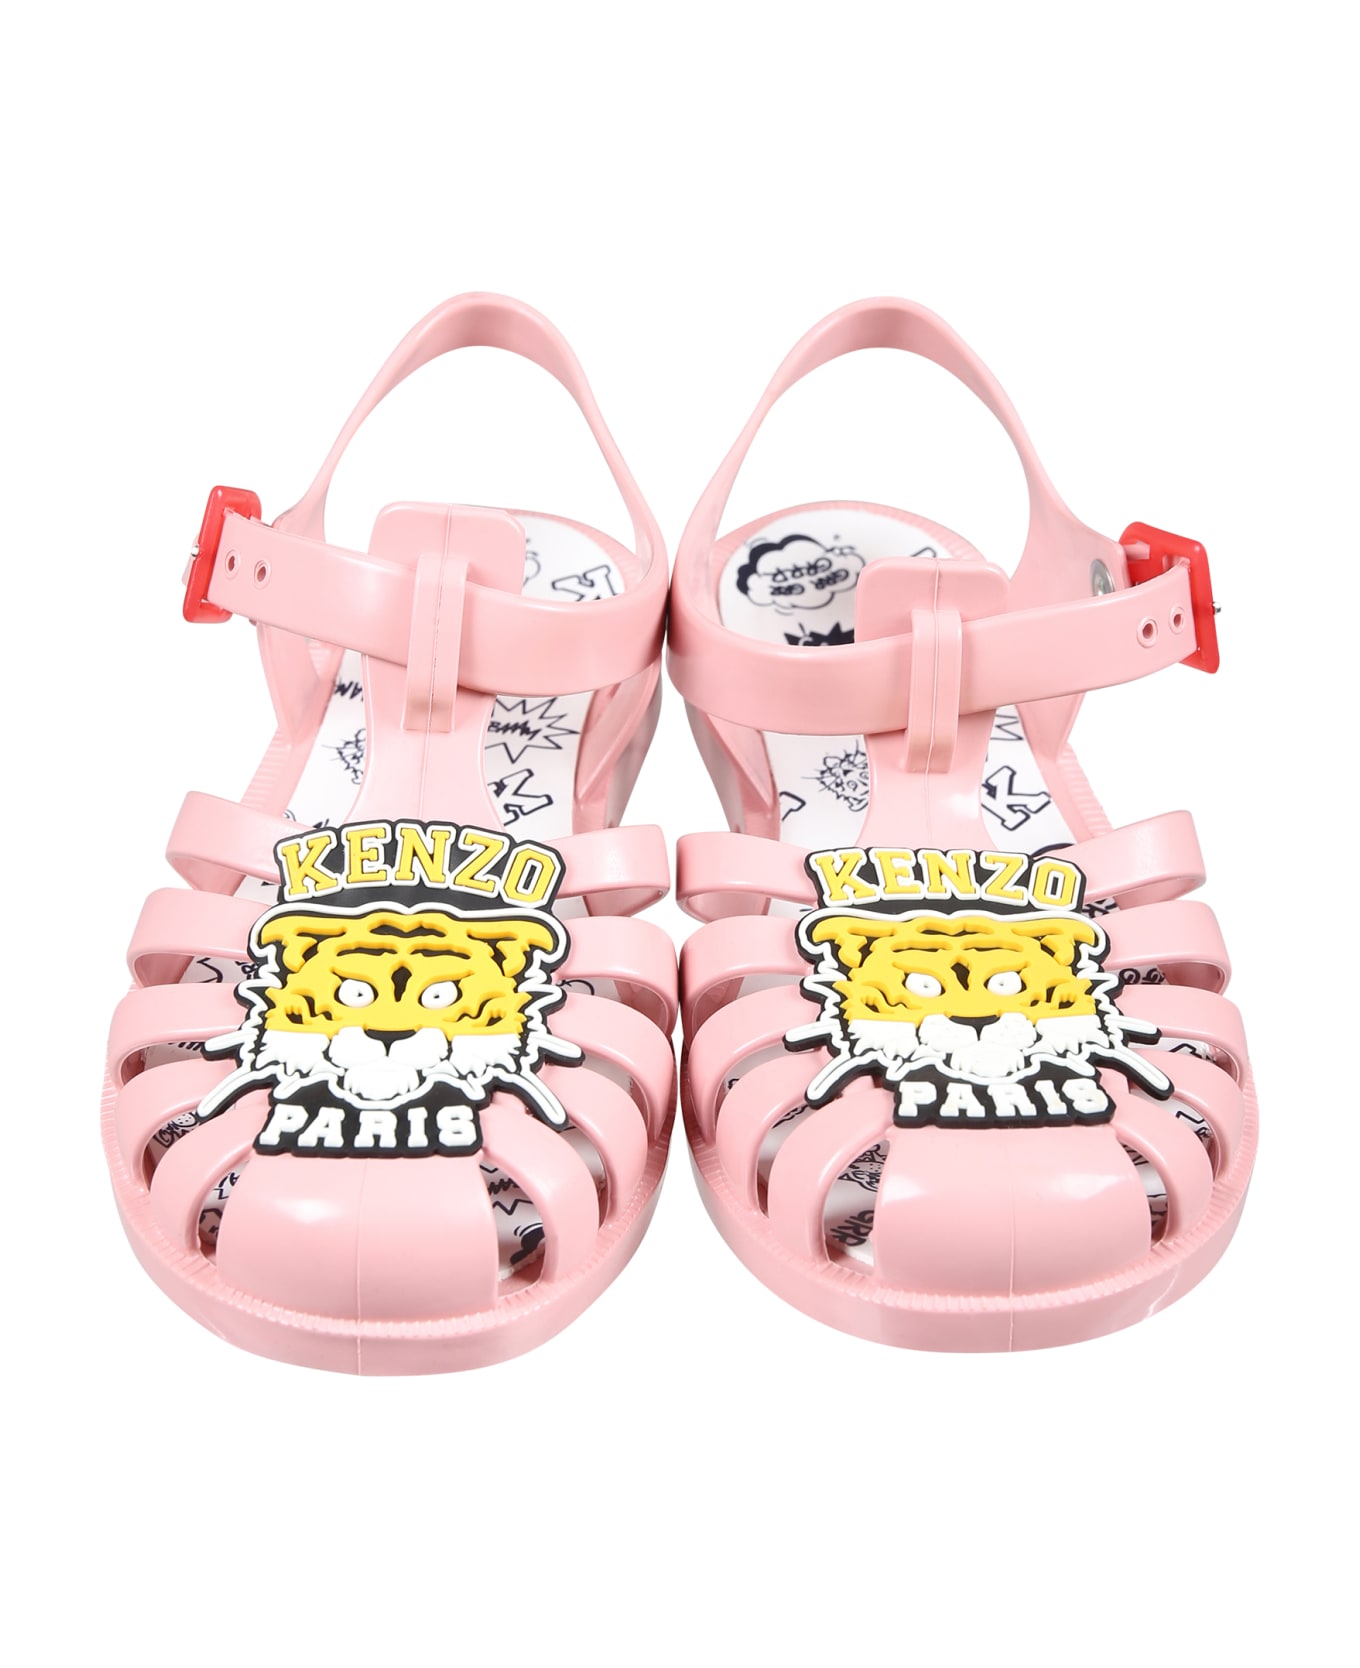 Kenzo Kids Pink Sandals For Girl With Tiger - Pink